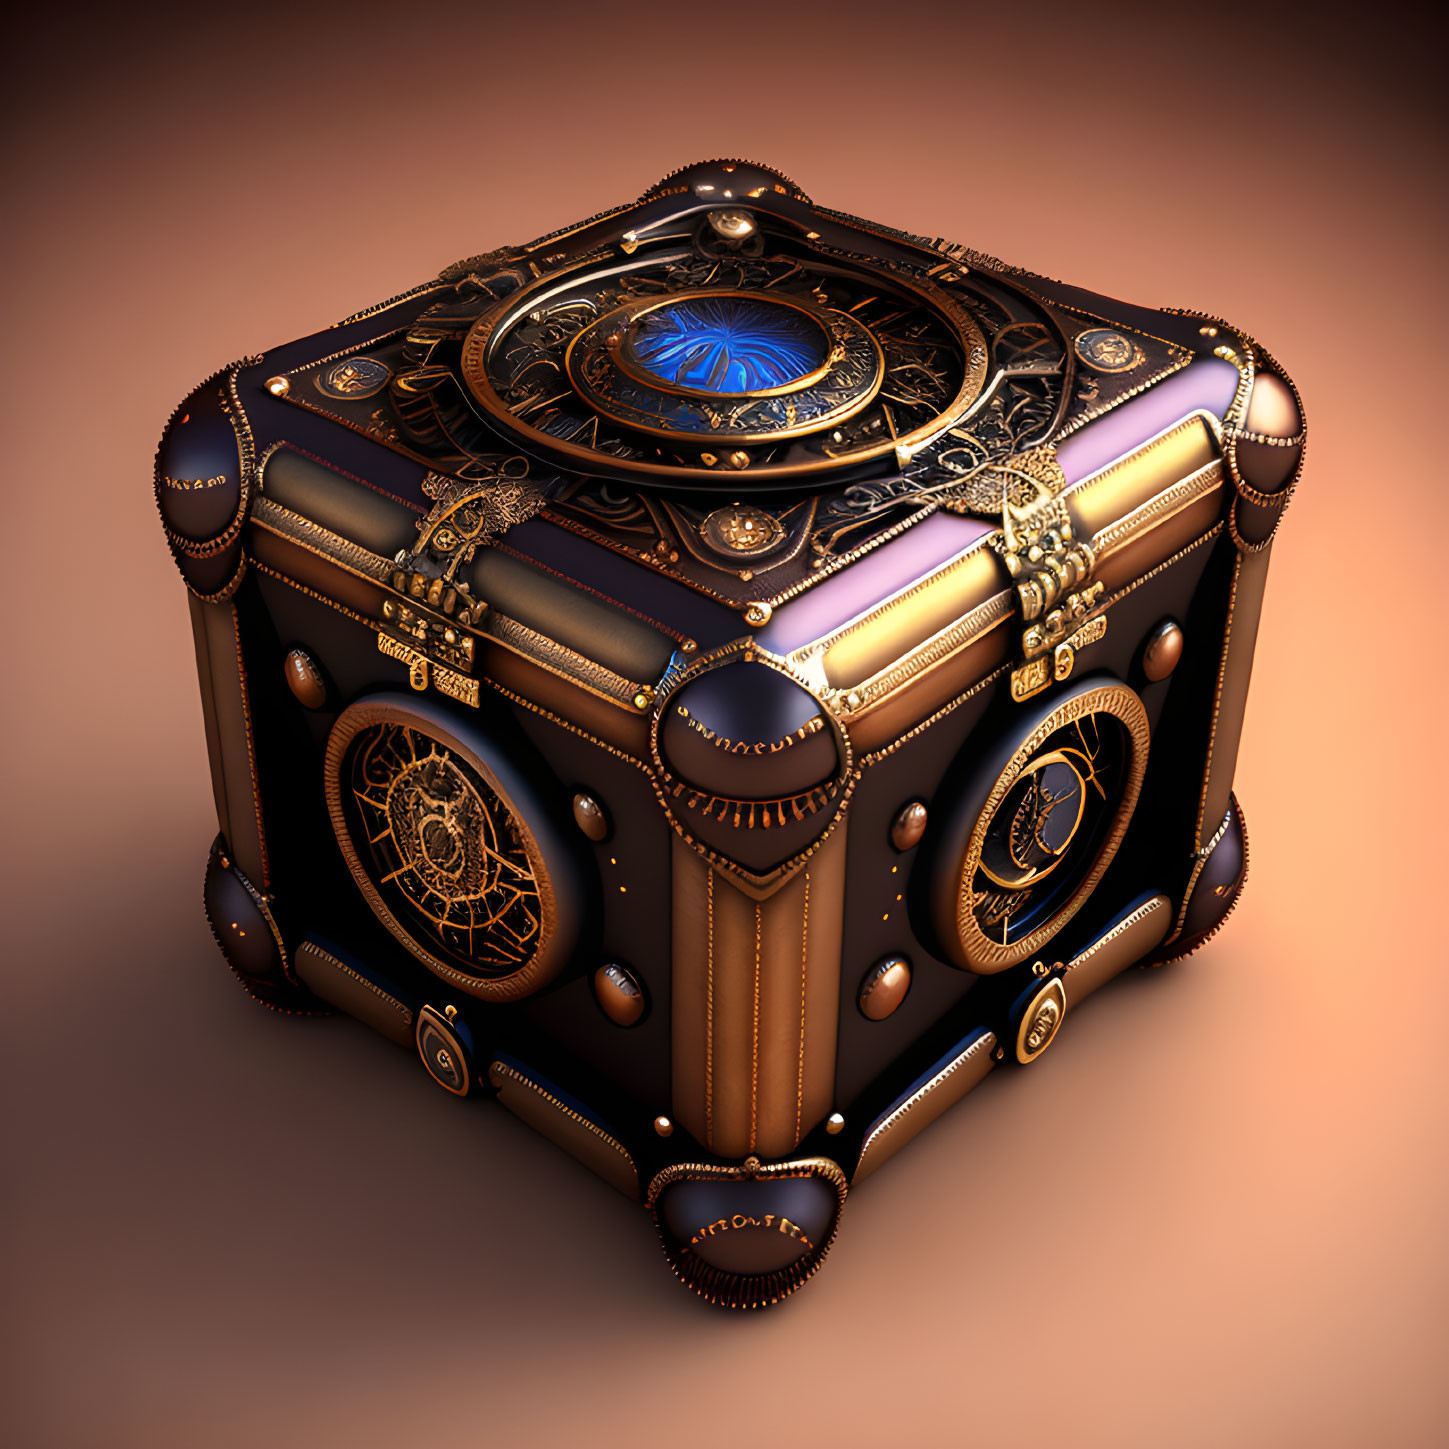 Cube-shaped artifact with metallic gears and astrological symbols on warm background